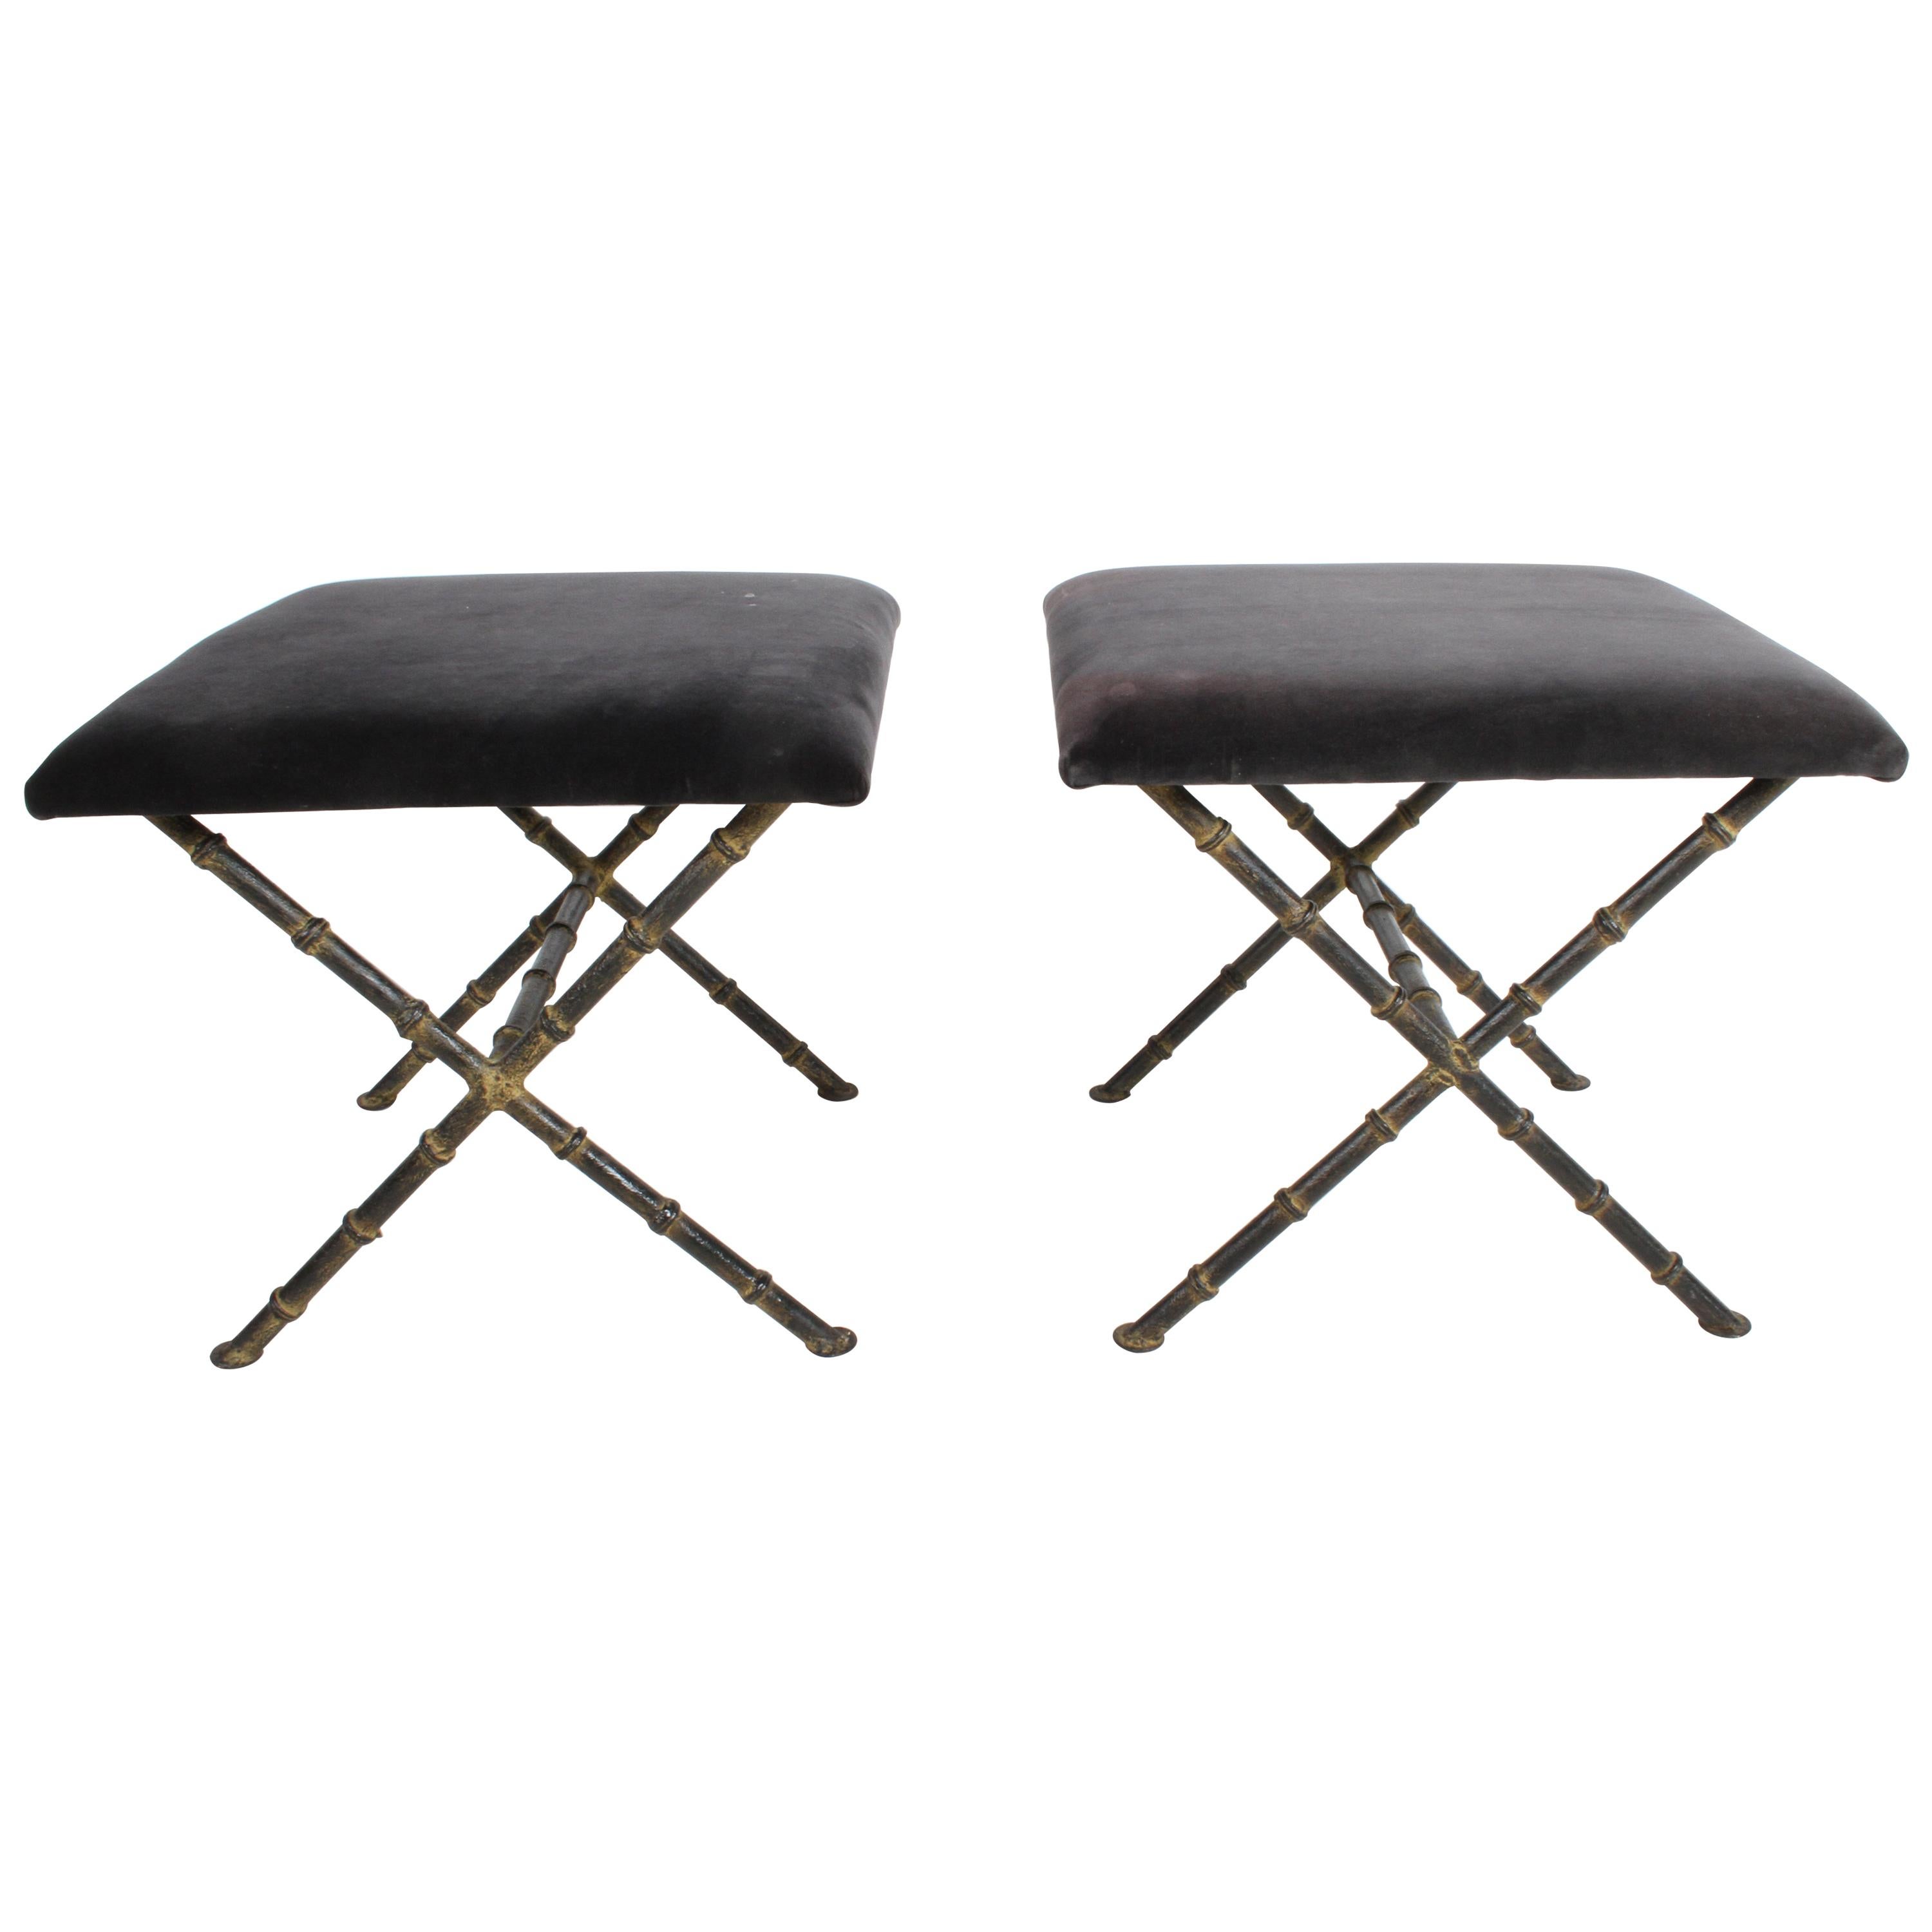 Pair of Hollywood Regency Faux Bamboo X-Base Stools, Benches or Ottomans